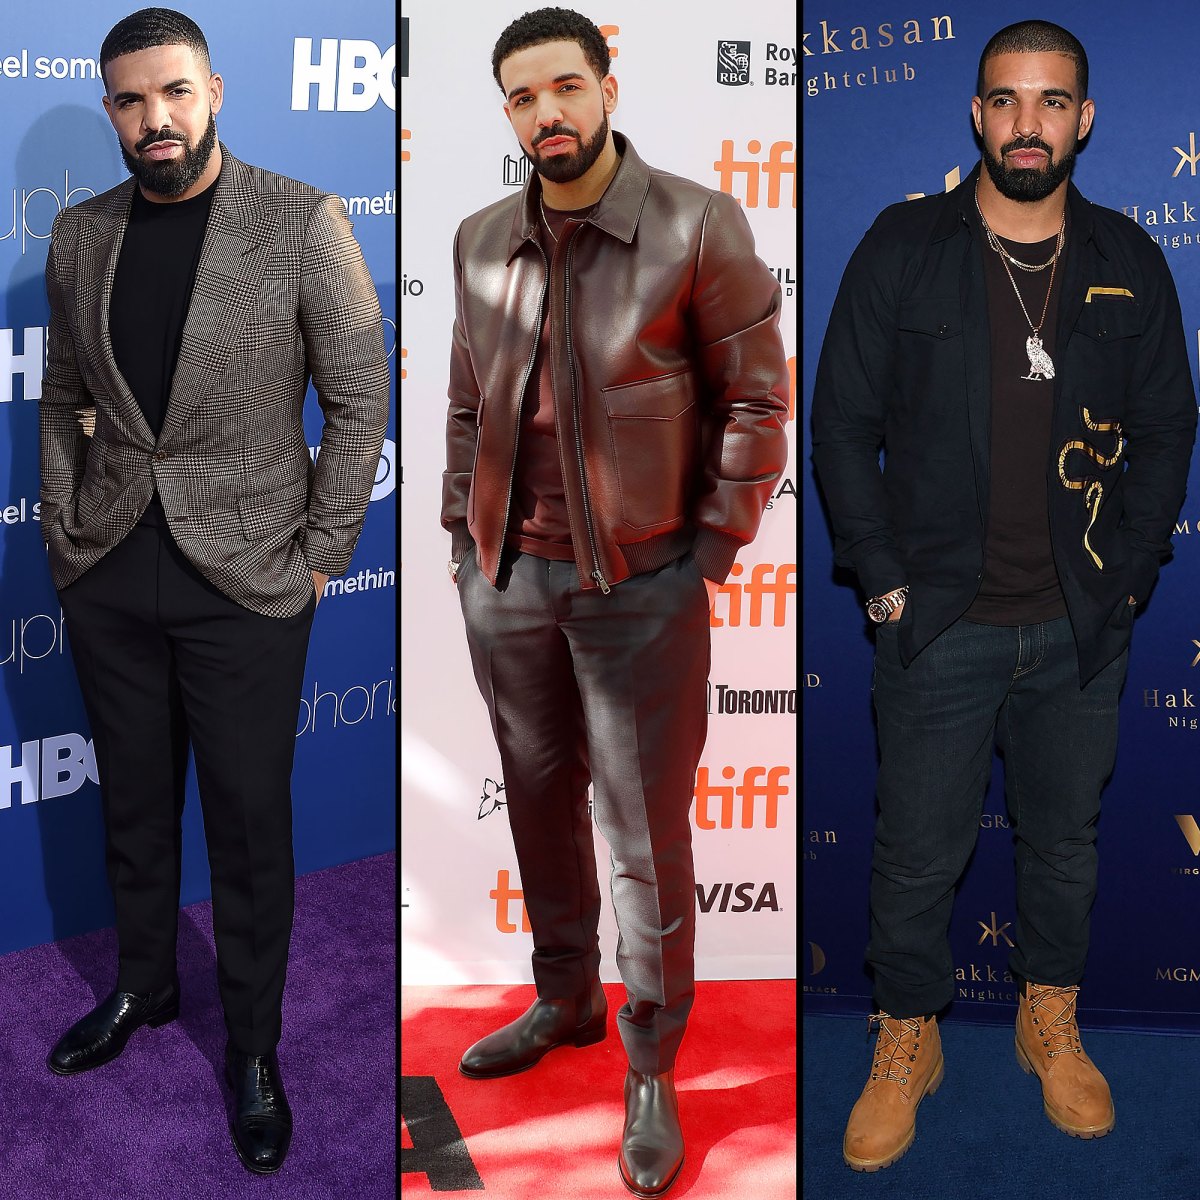 Drake looks luxurious in a fur coat as he continues his birthday